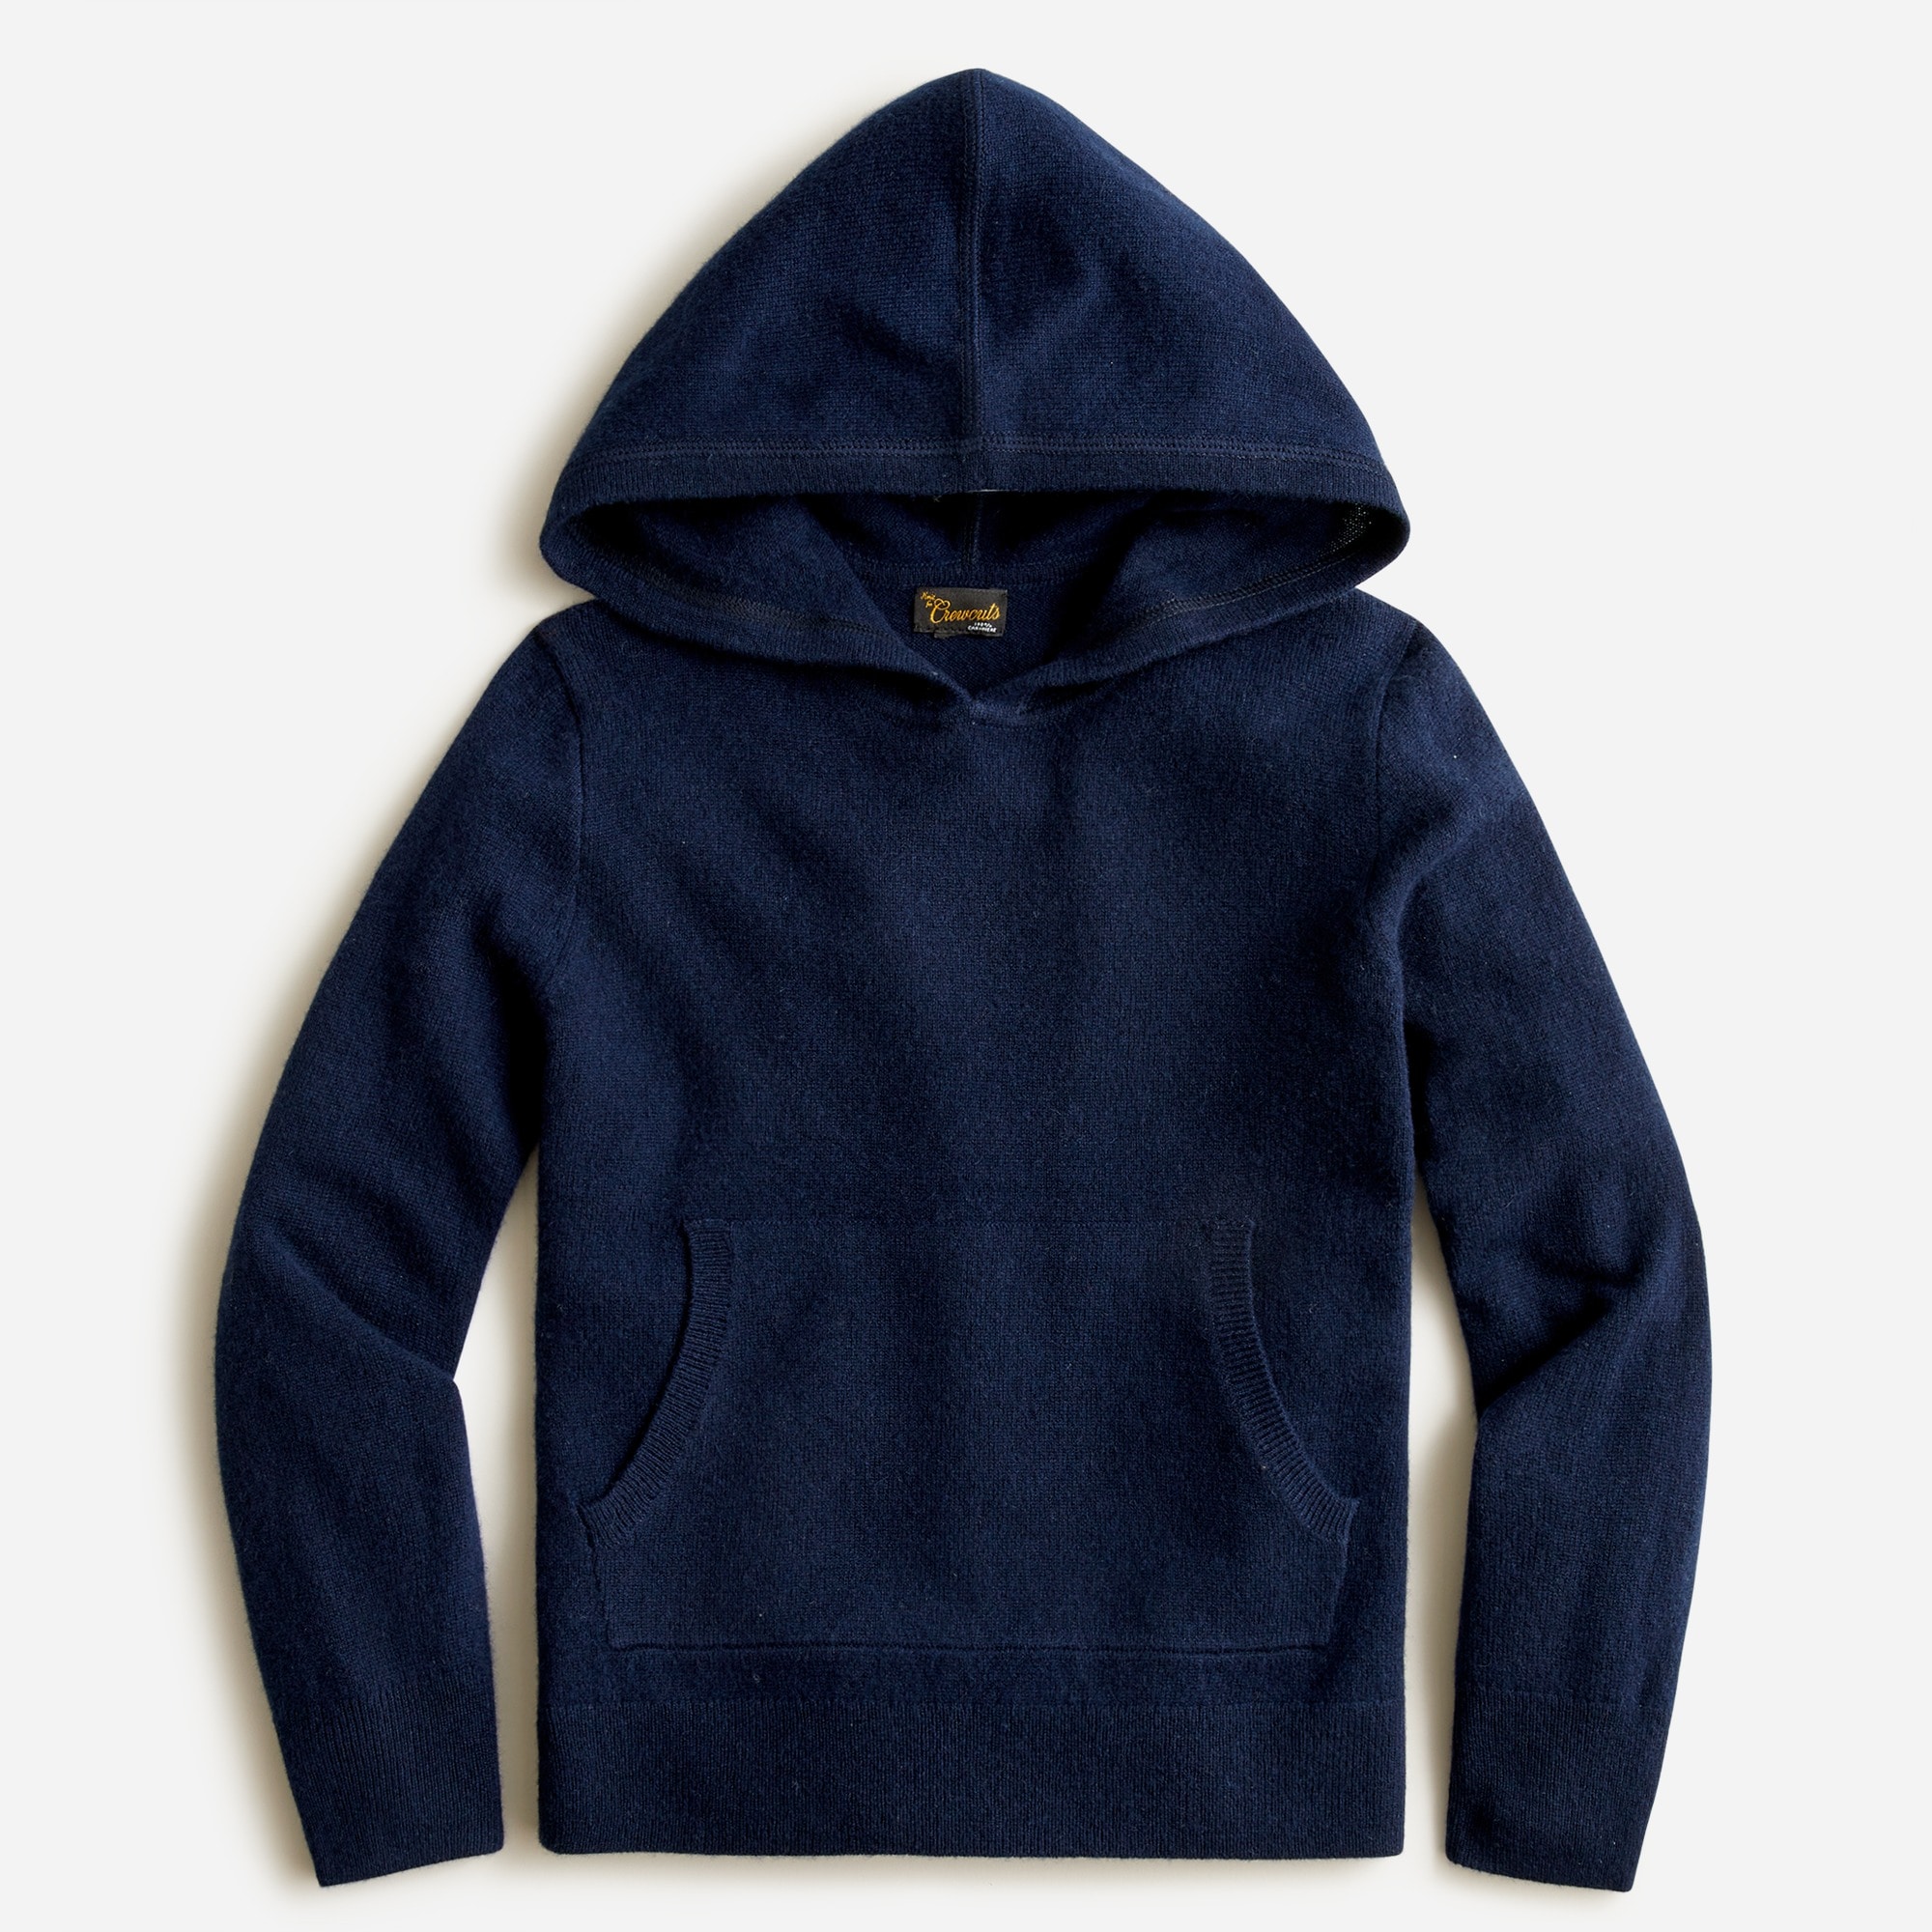  Kids&apos; cashmere pullover hoodie